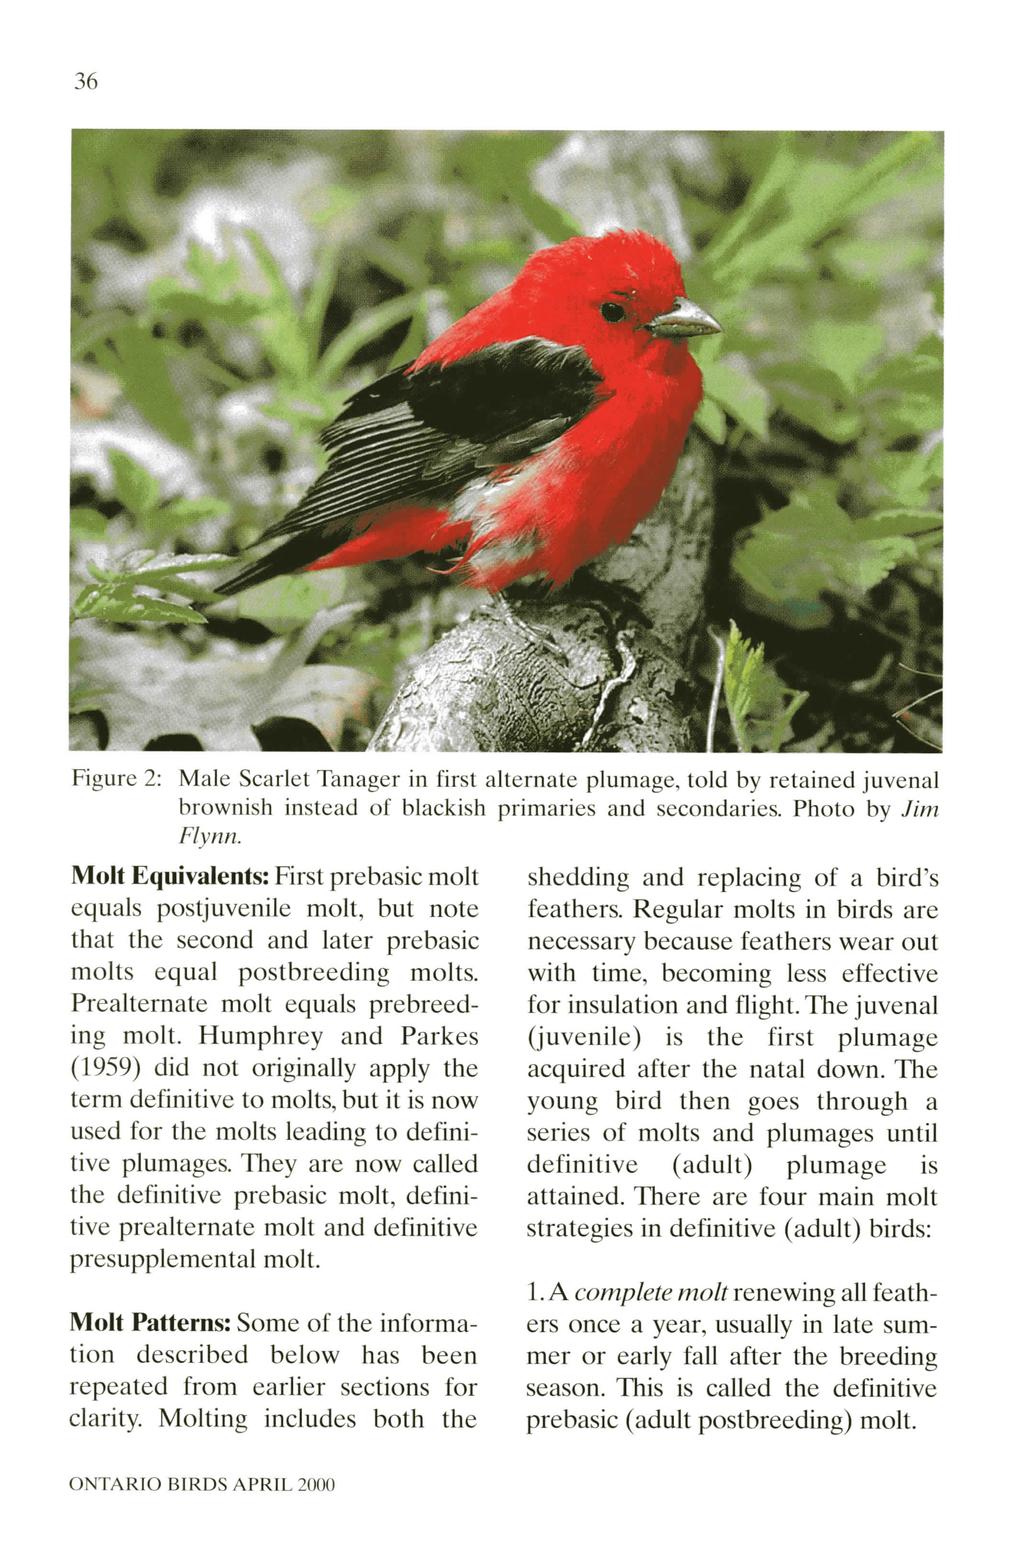 36 Figure 2: Male Scarlet Tanager in first alternate plumage, told by retained juvenal brownish instead of blackish primaries and secondaries. Photo by Jim Flynn.